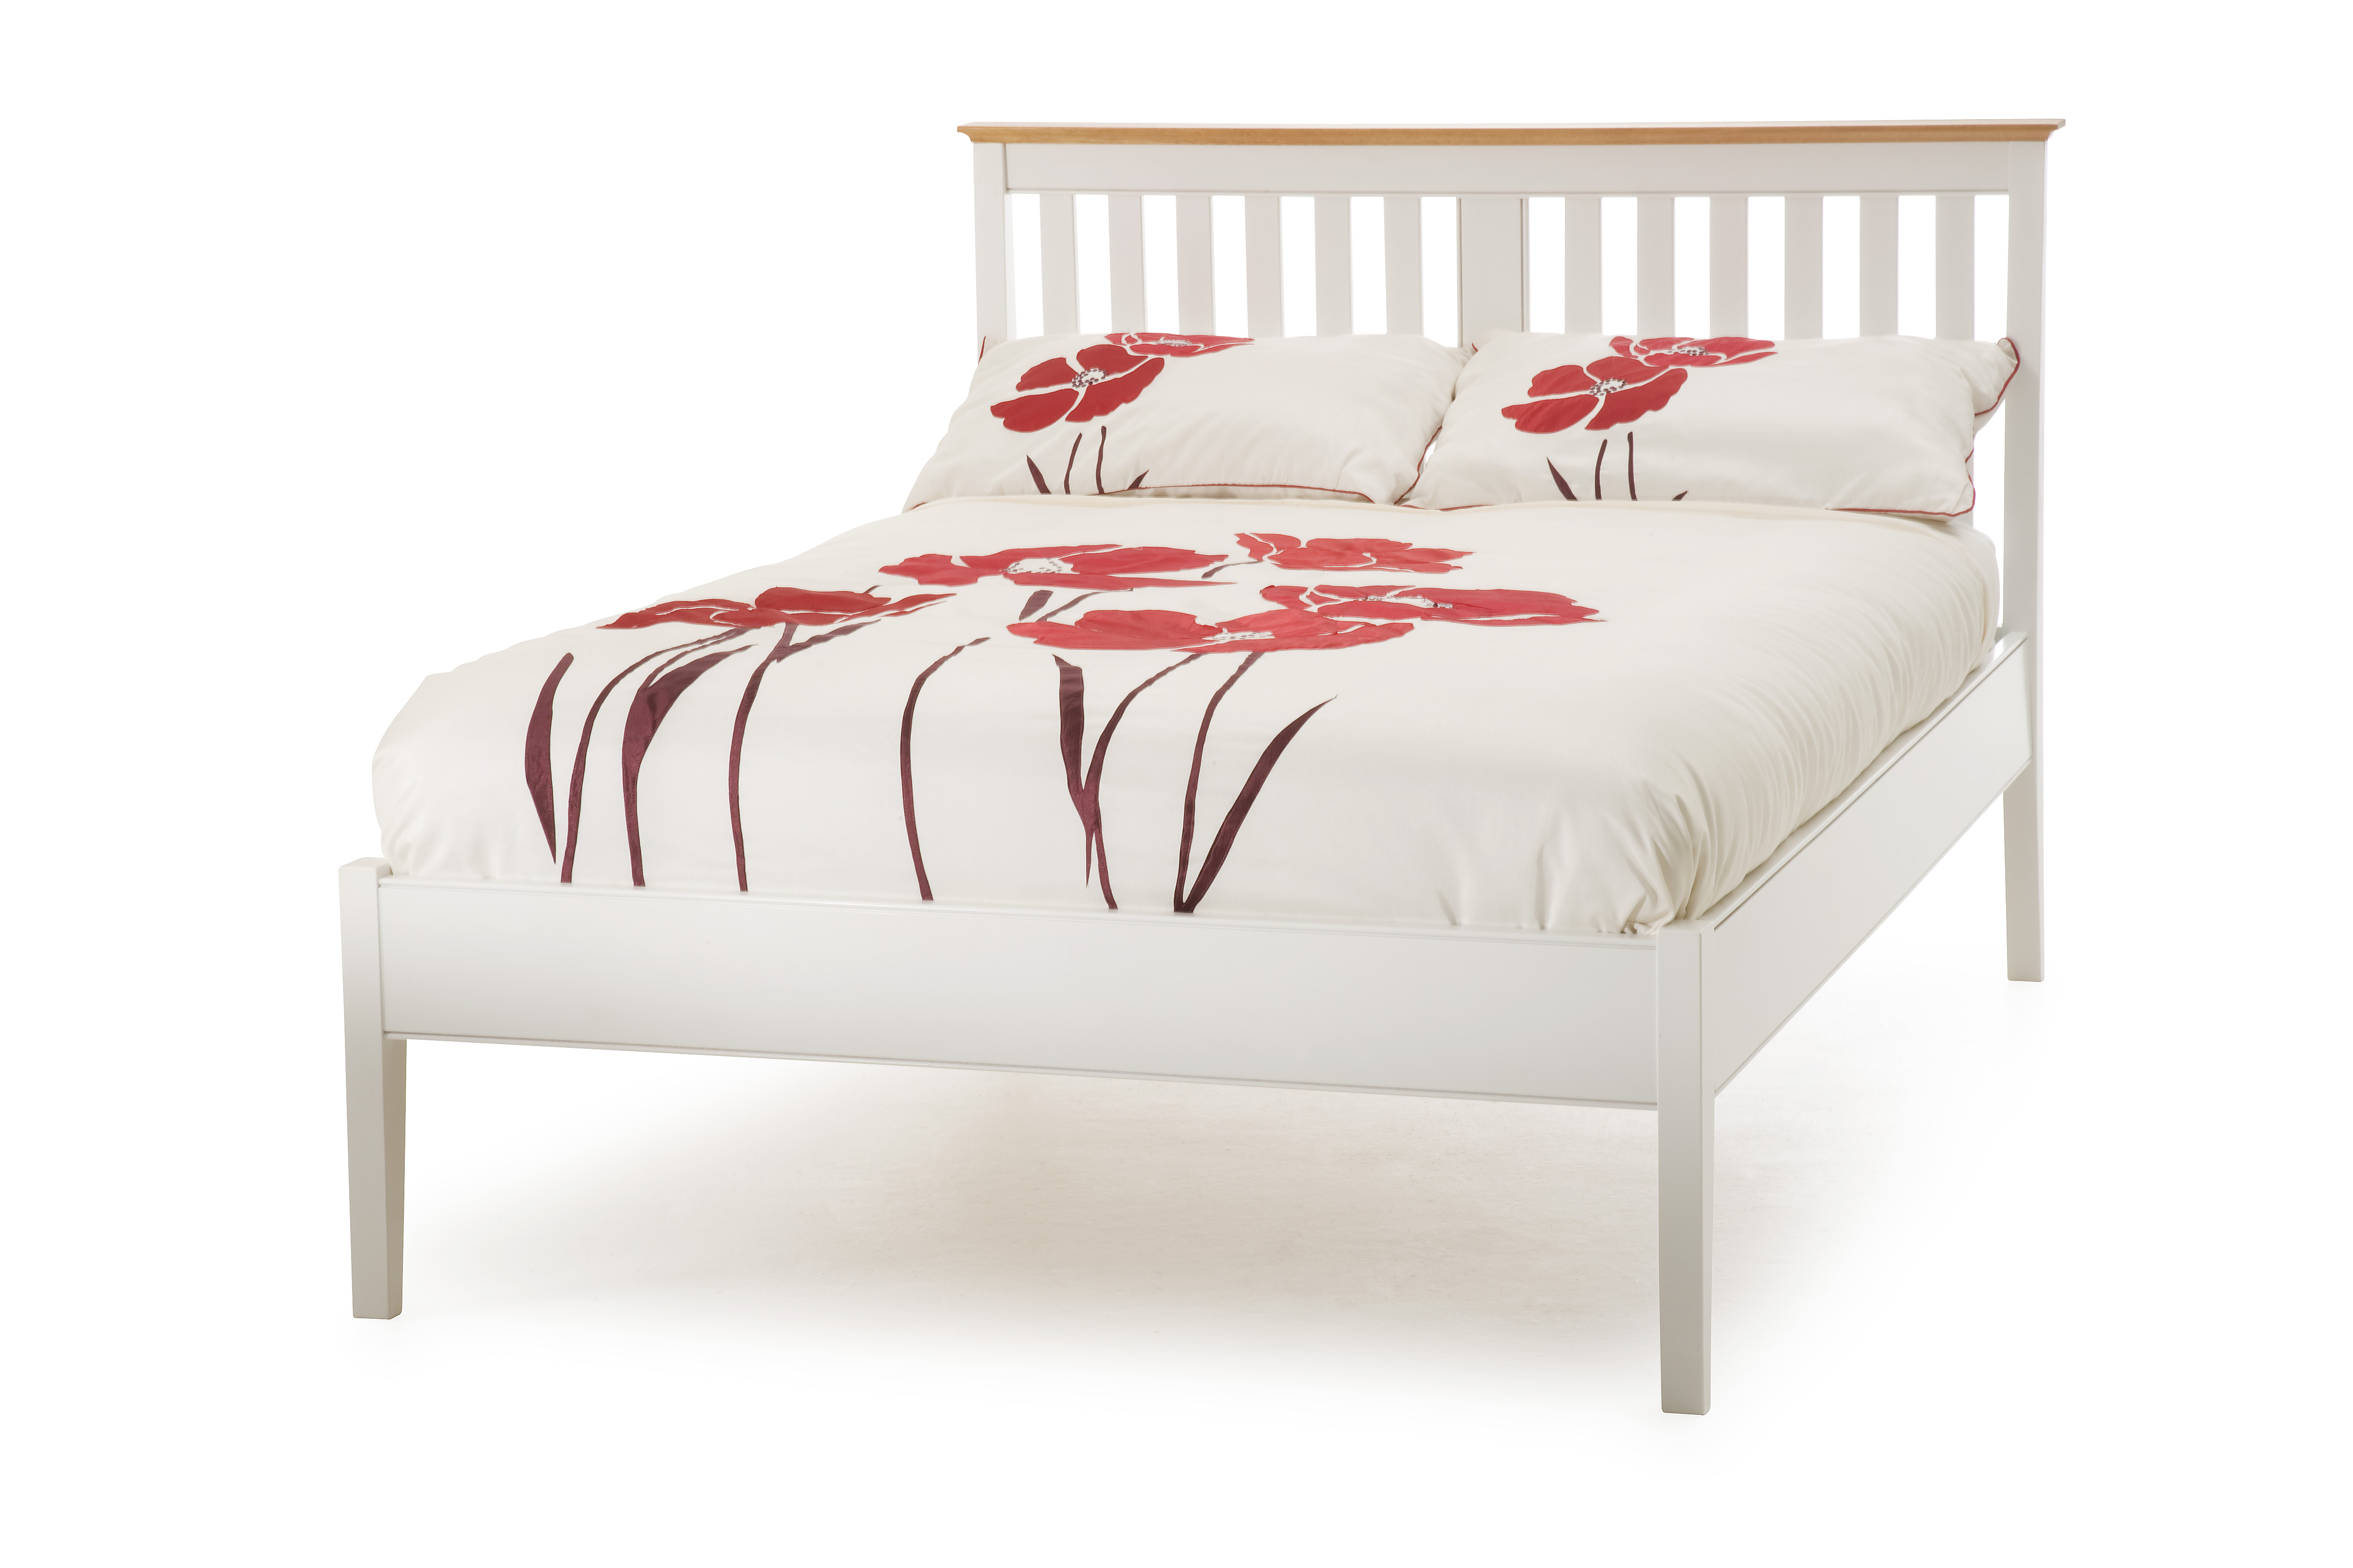 Serene Grace Low Foot End Bed Golden Cherry Single